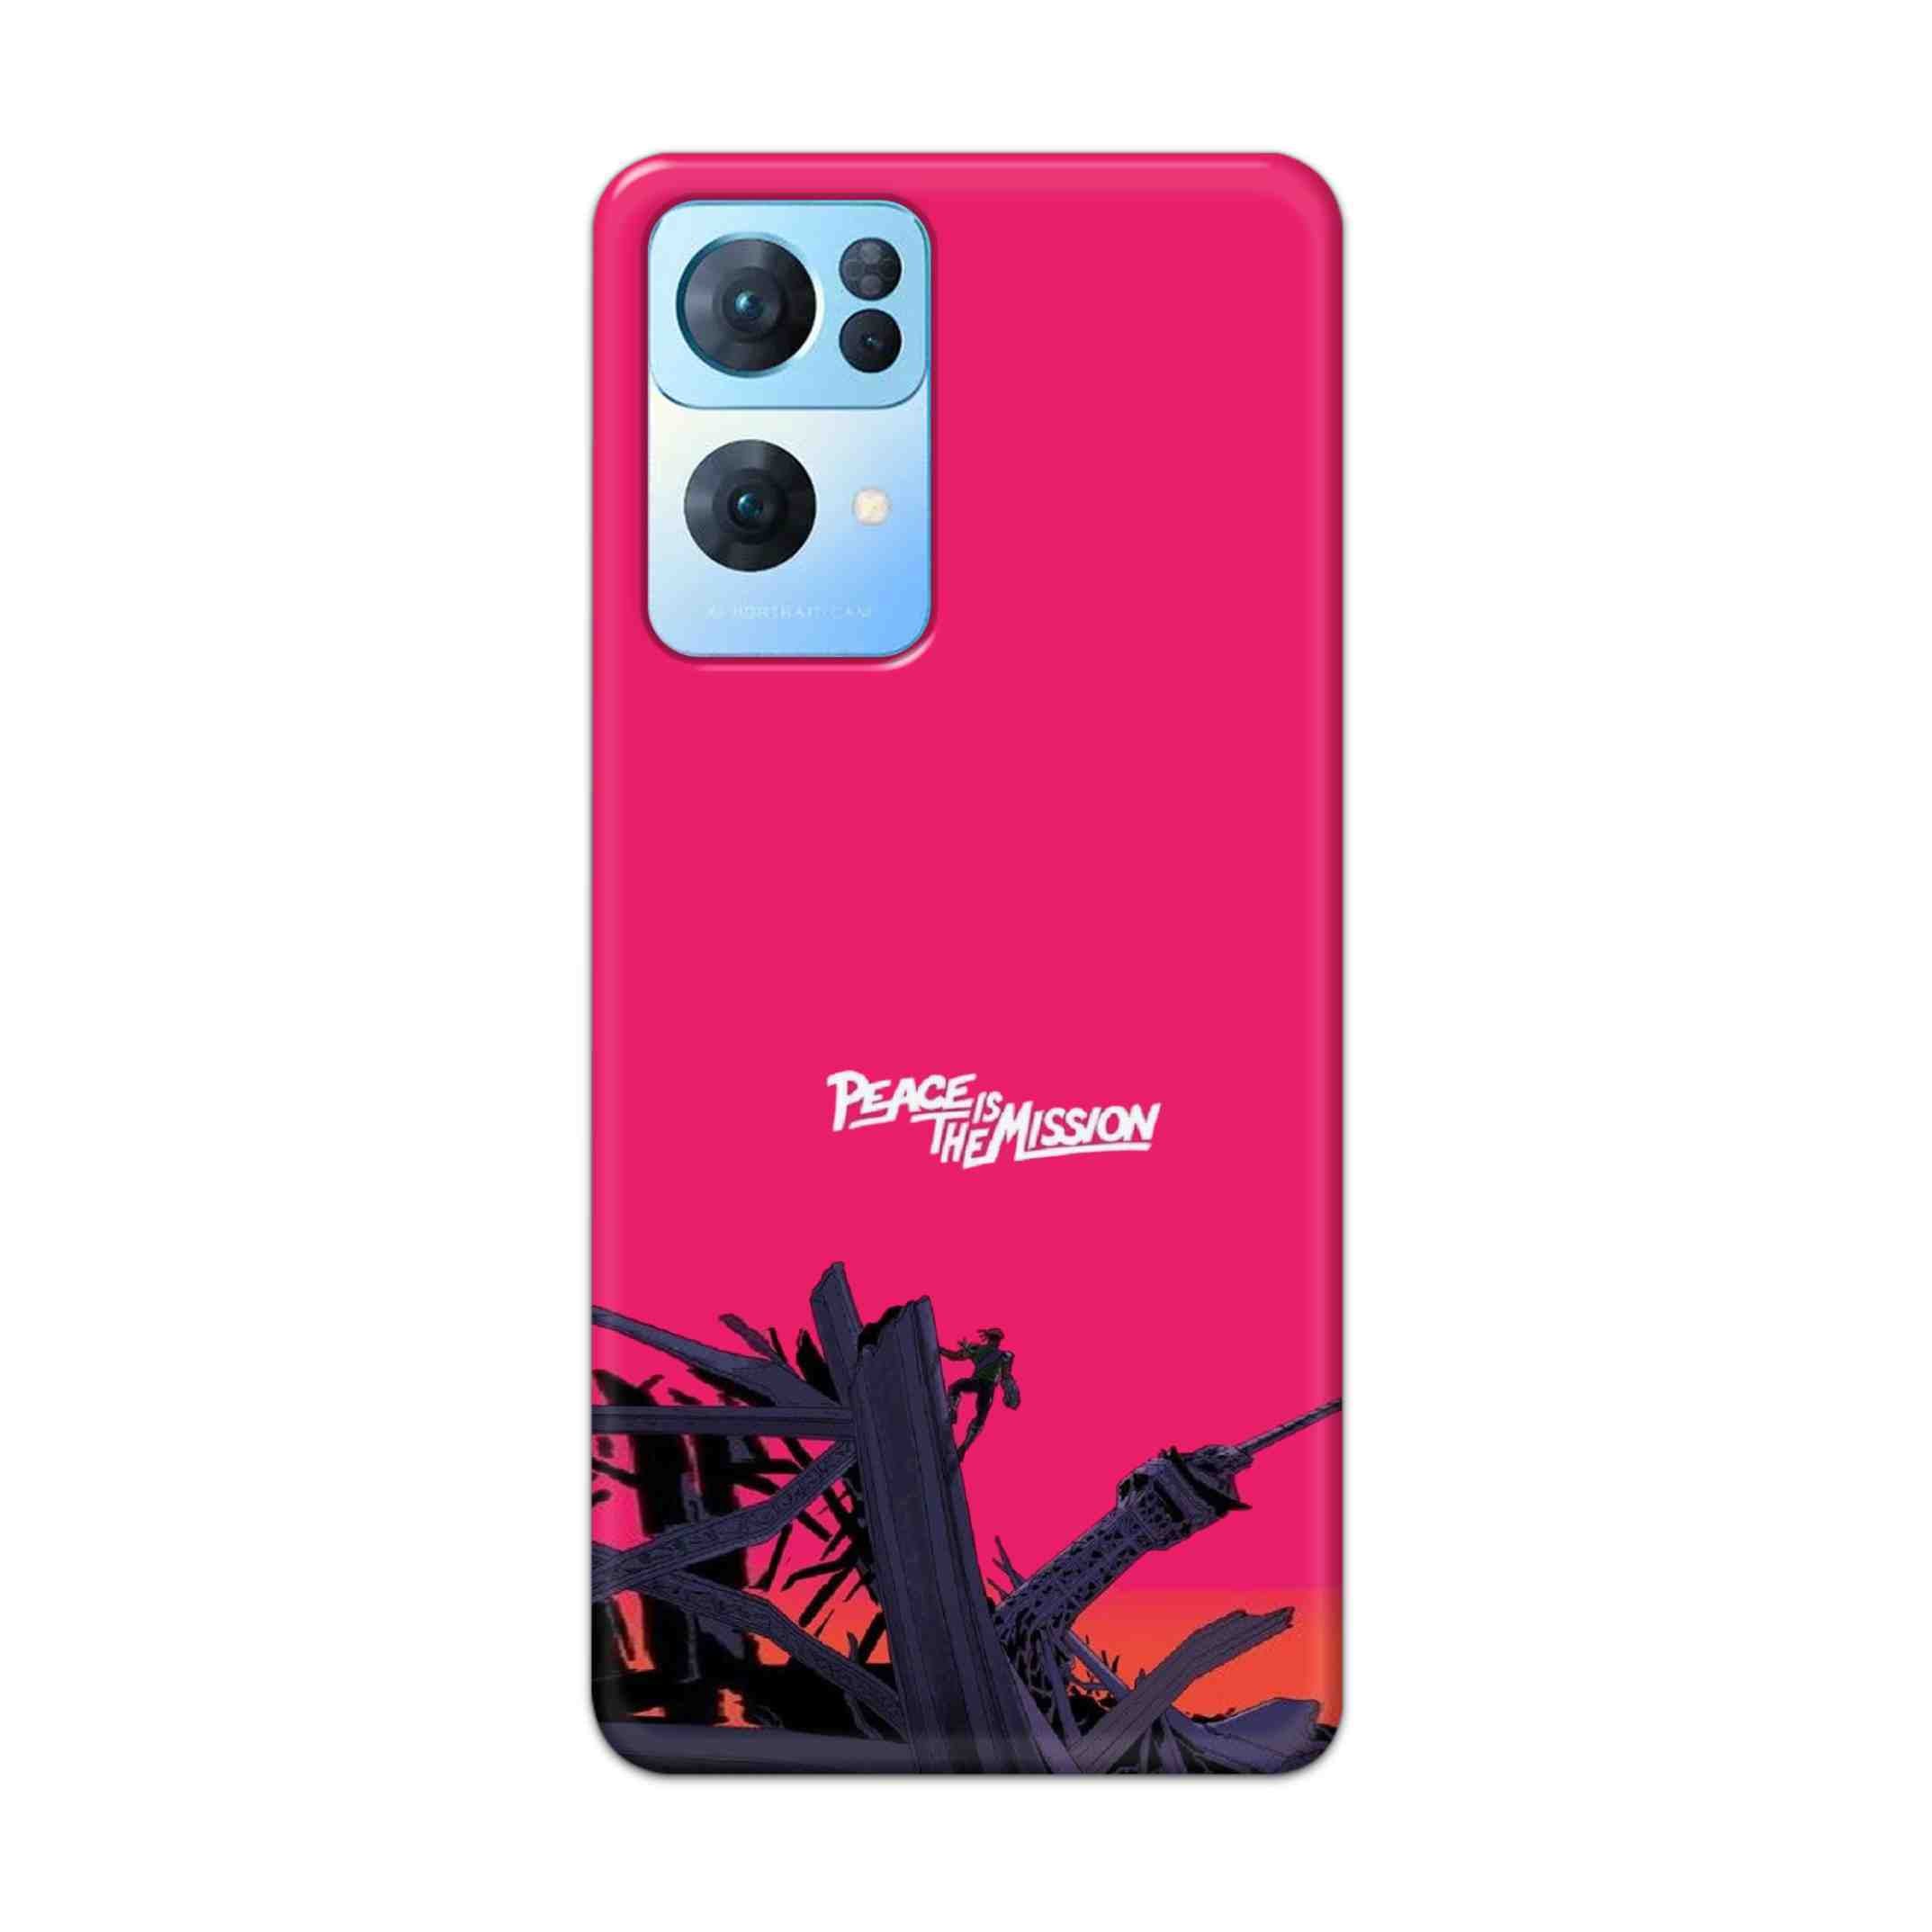 Buy Peace Is The Mission Hard Back Mobile Phone Case Cover For Oppo Reno 7 Pro Online